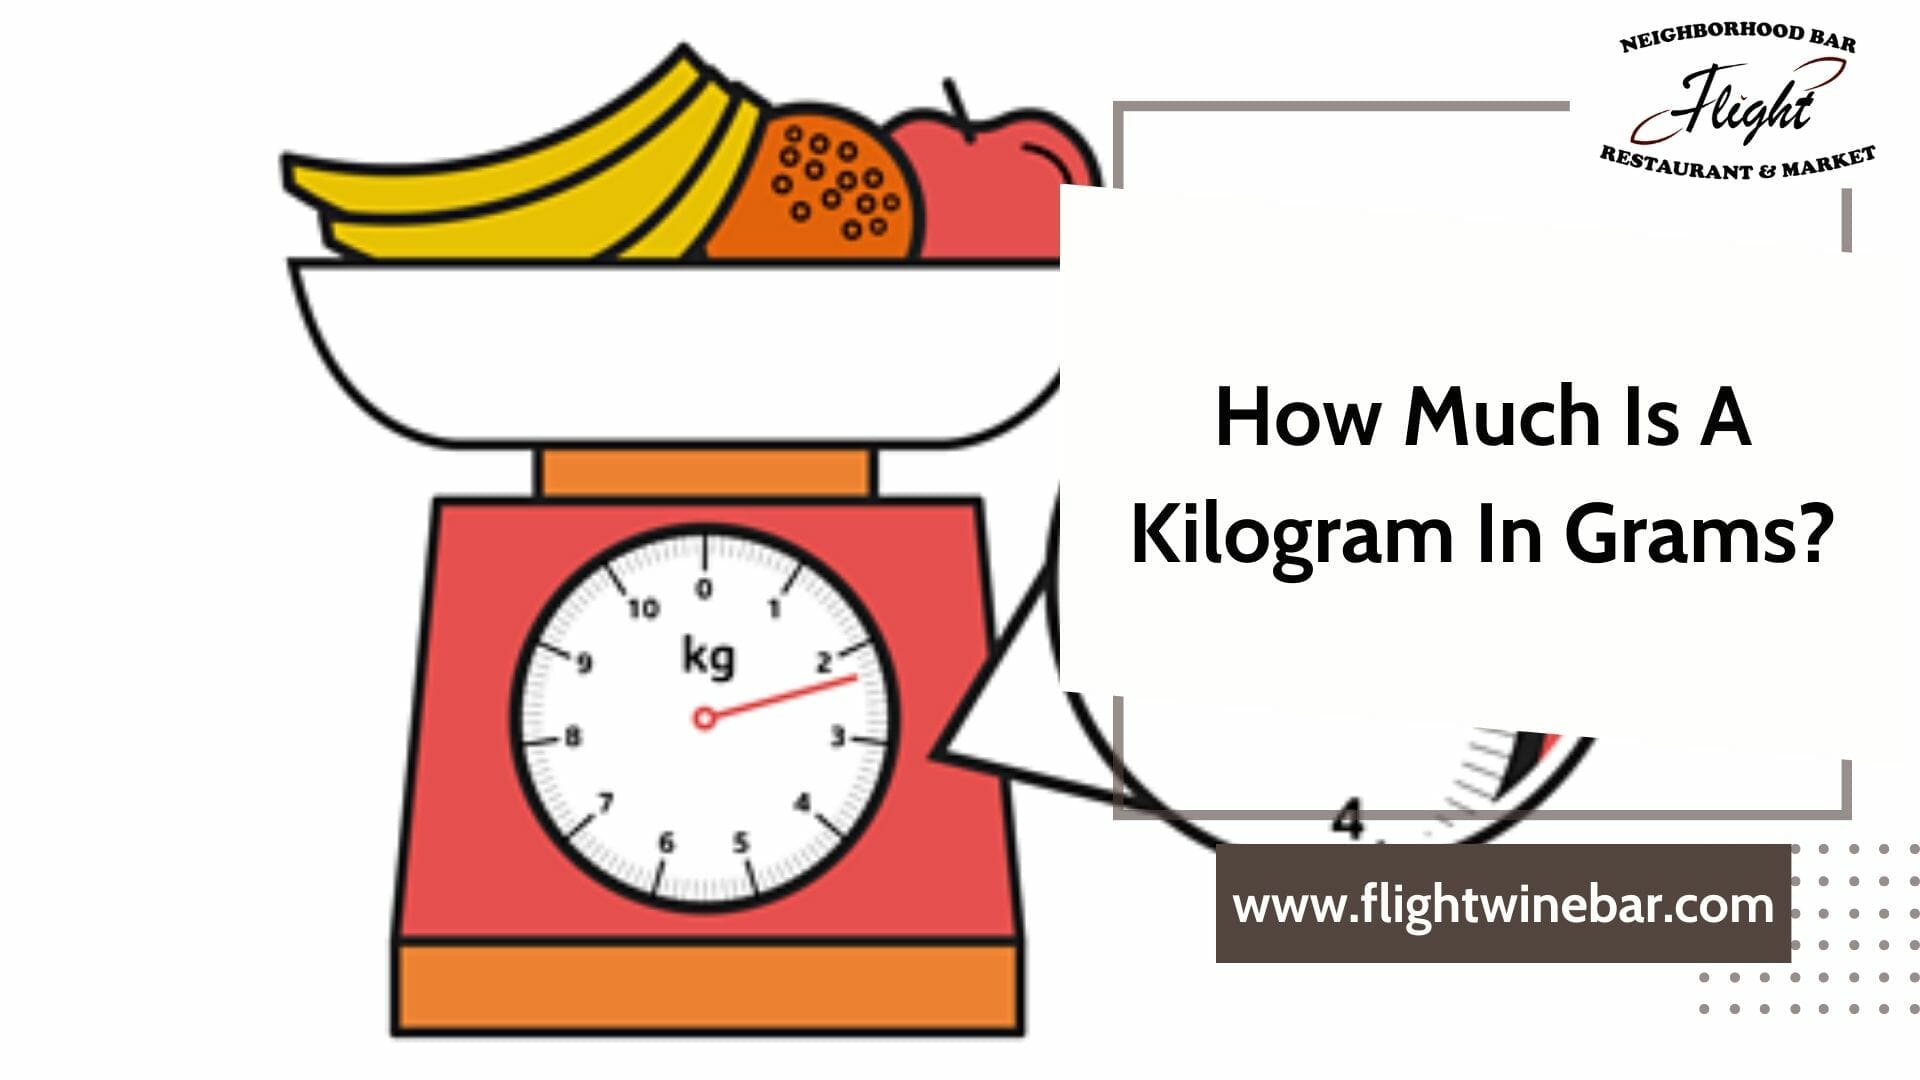 How Much Is A Kilogram In Grams